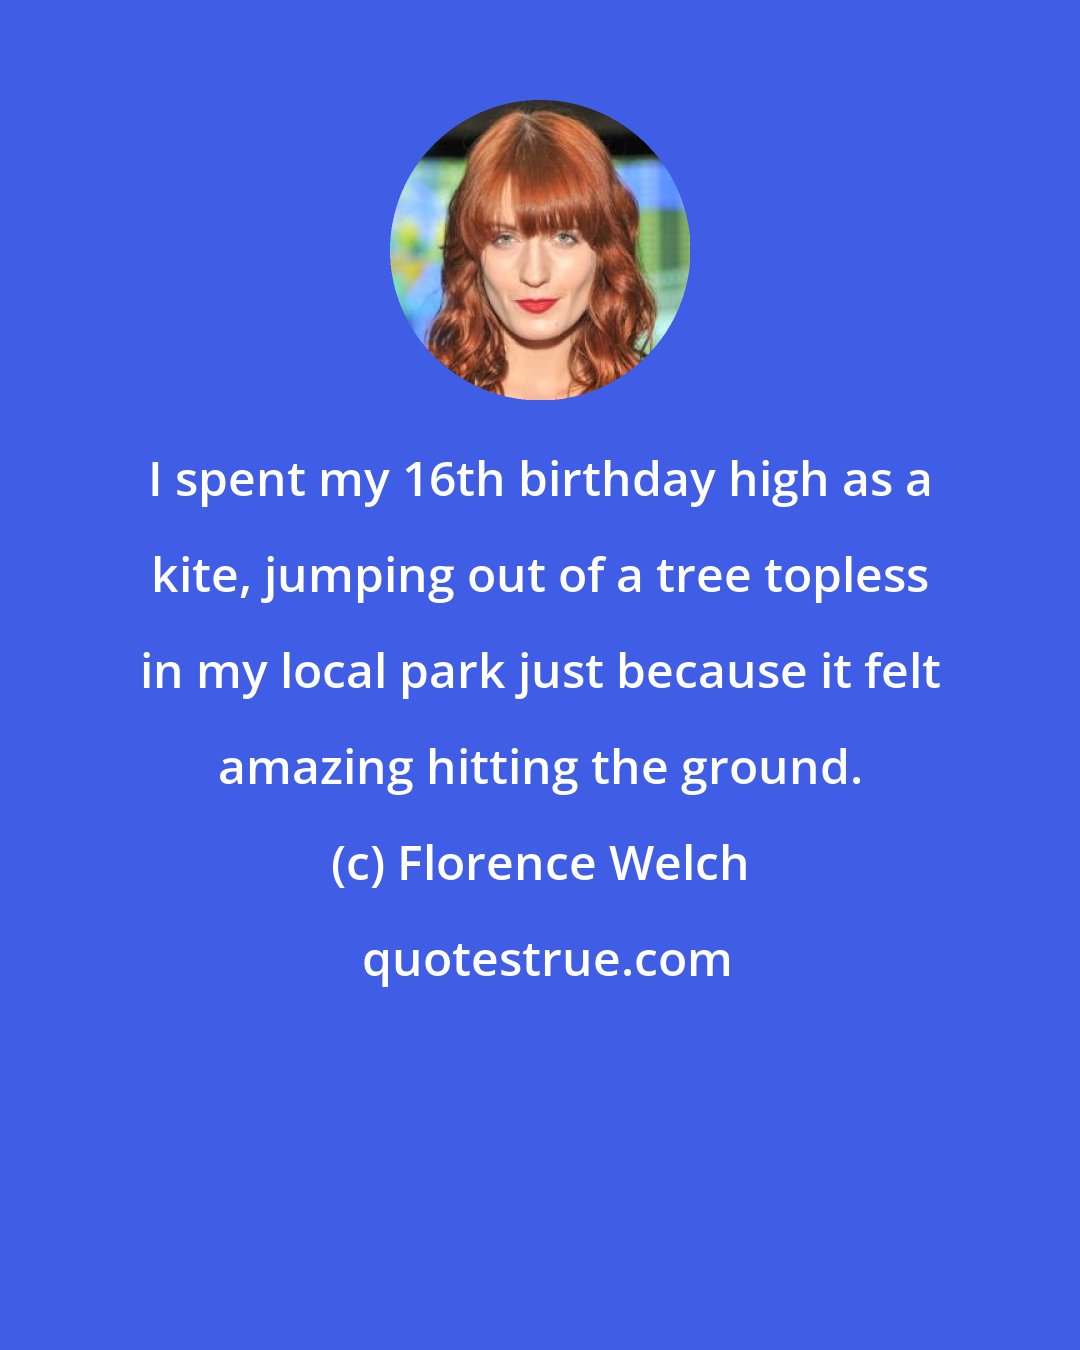 Florence Welch: I spent my 16th birthday high as a kite, jumping out of a tree topless in my local park just because it felt amazing hitting the ground.